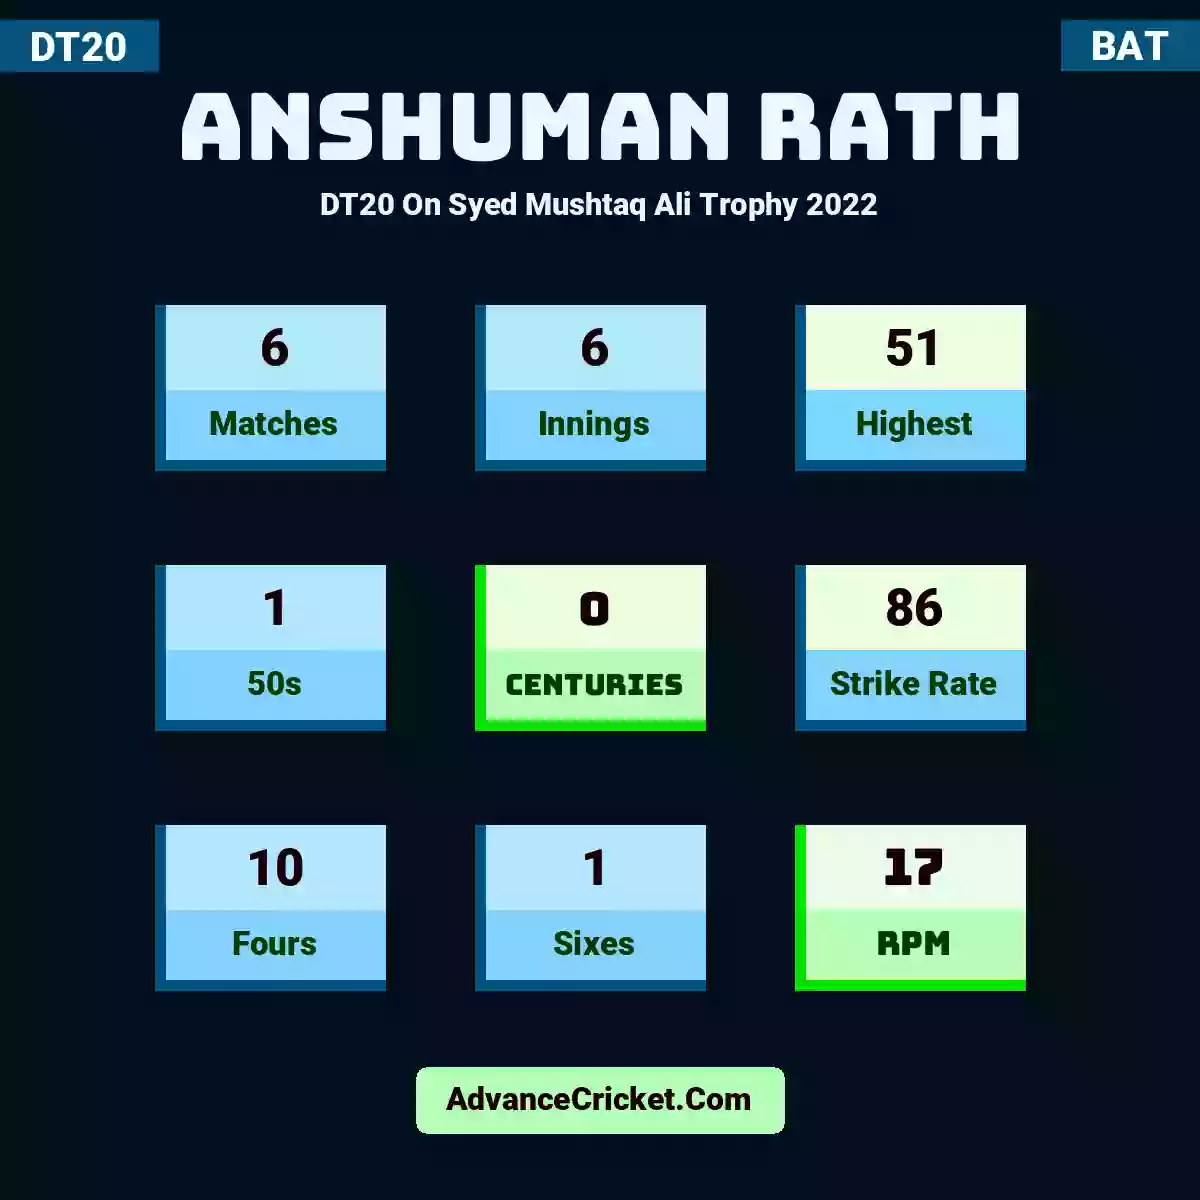 Anshuman Rath DT20  On Syed Mushtaq Ali Trophy 2022, Anshuman Rath played 6 matches, scored 51 runs as highest, 1 half-centuries, and 0 centuries, with a strike rate of 86. A.Rath hit 10 fours and 1 sixes, with an RPM of 17.